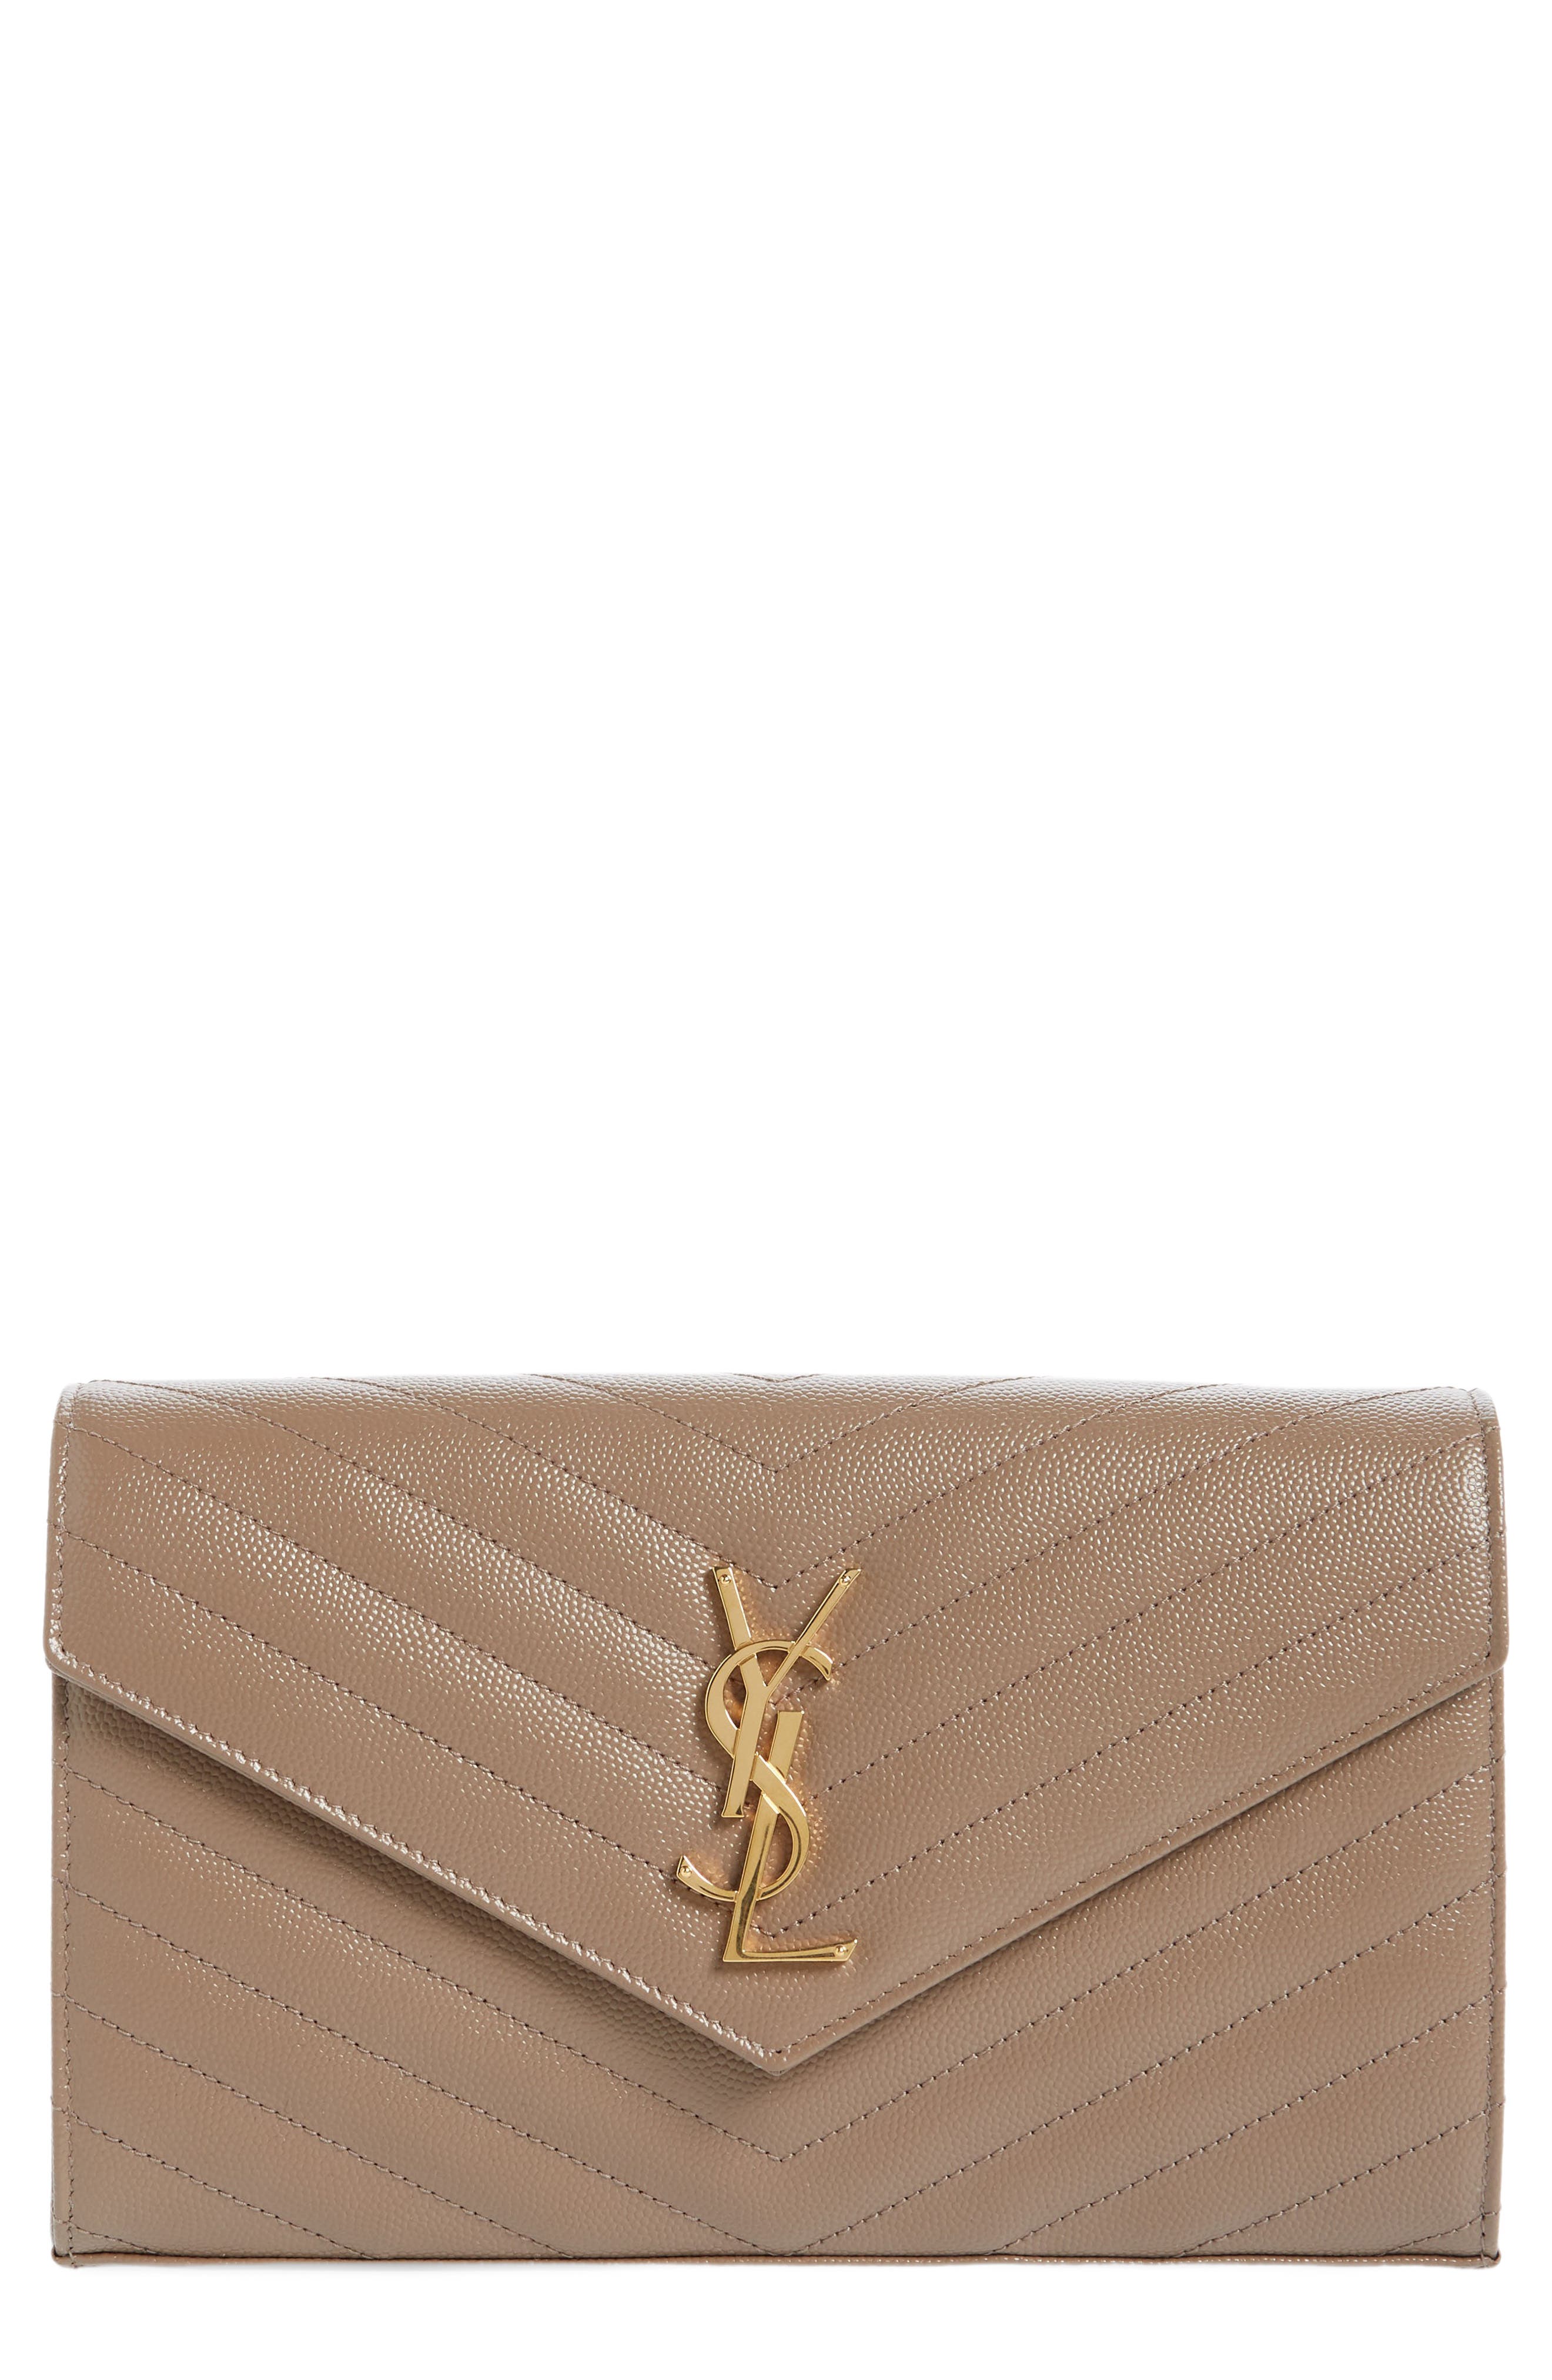 N°21 Leather Wallet Save 20% Womens Wallets and cardholders N°21 Wallets and cardholders 